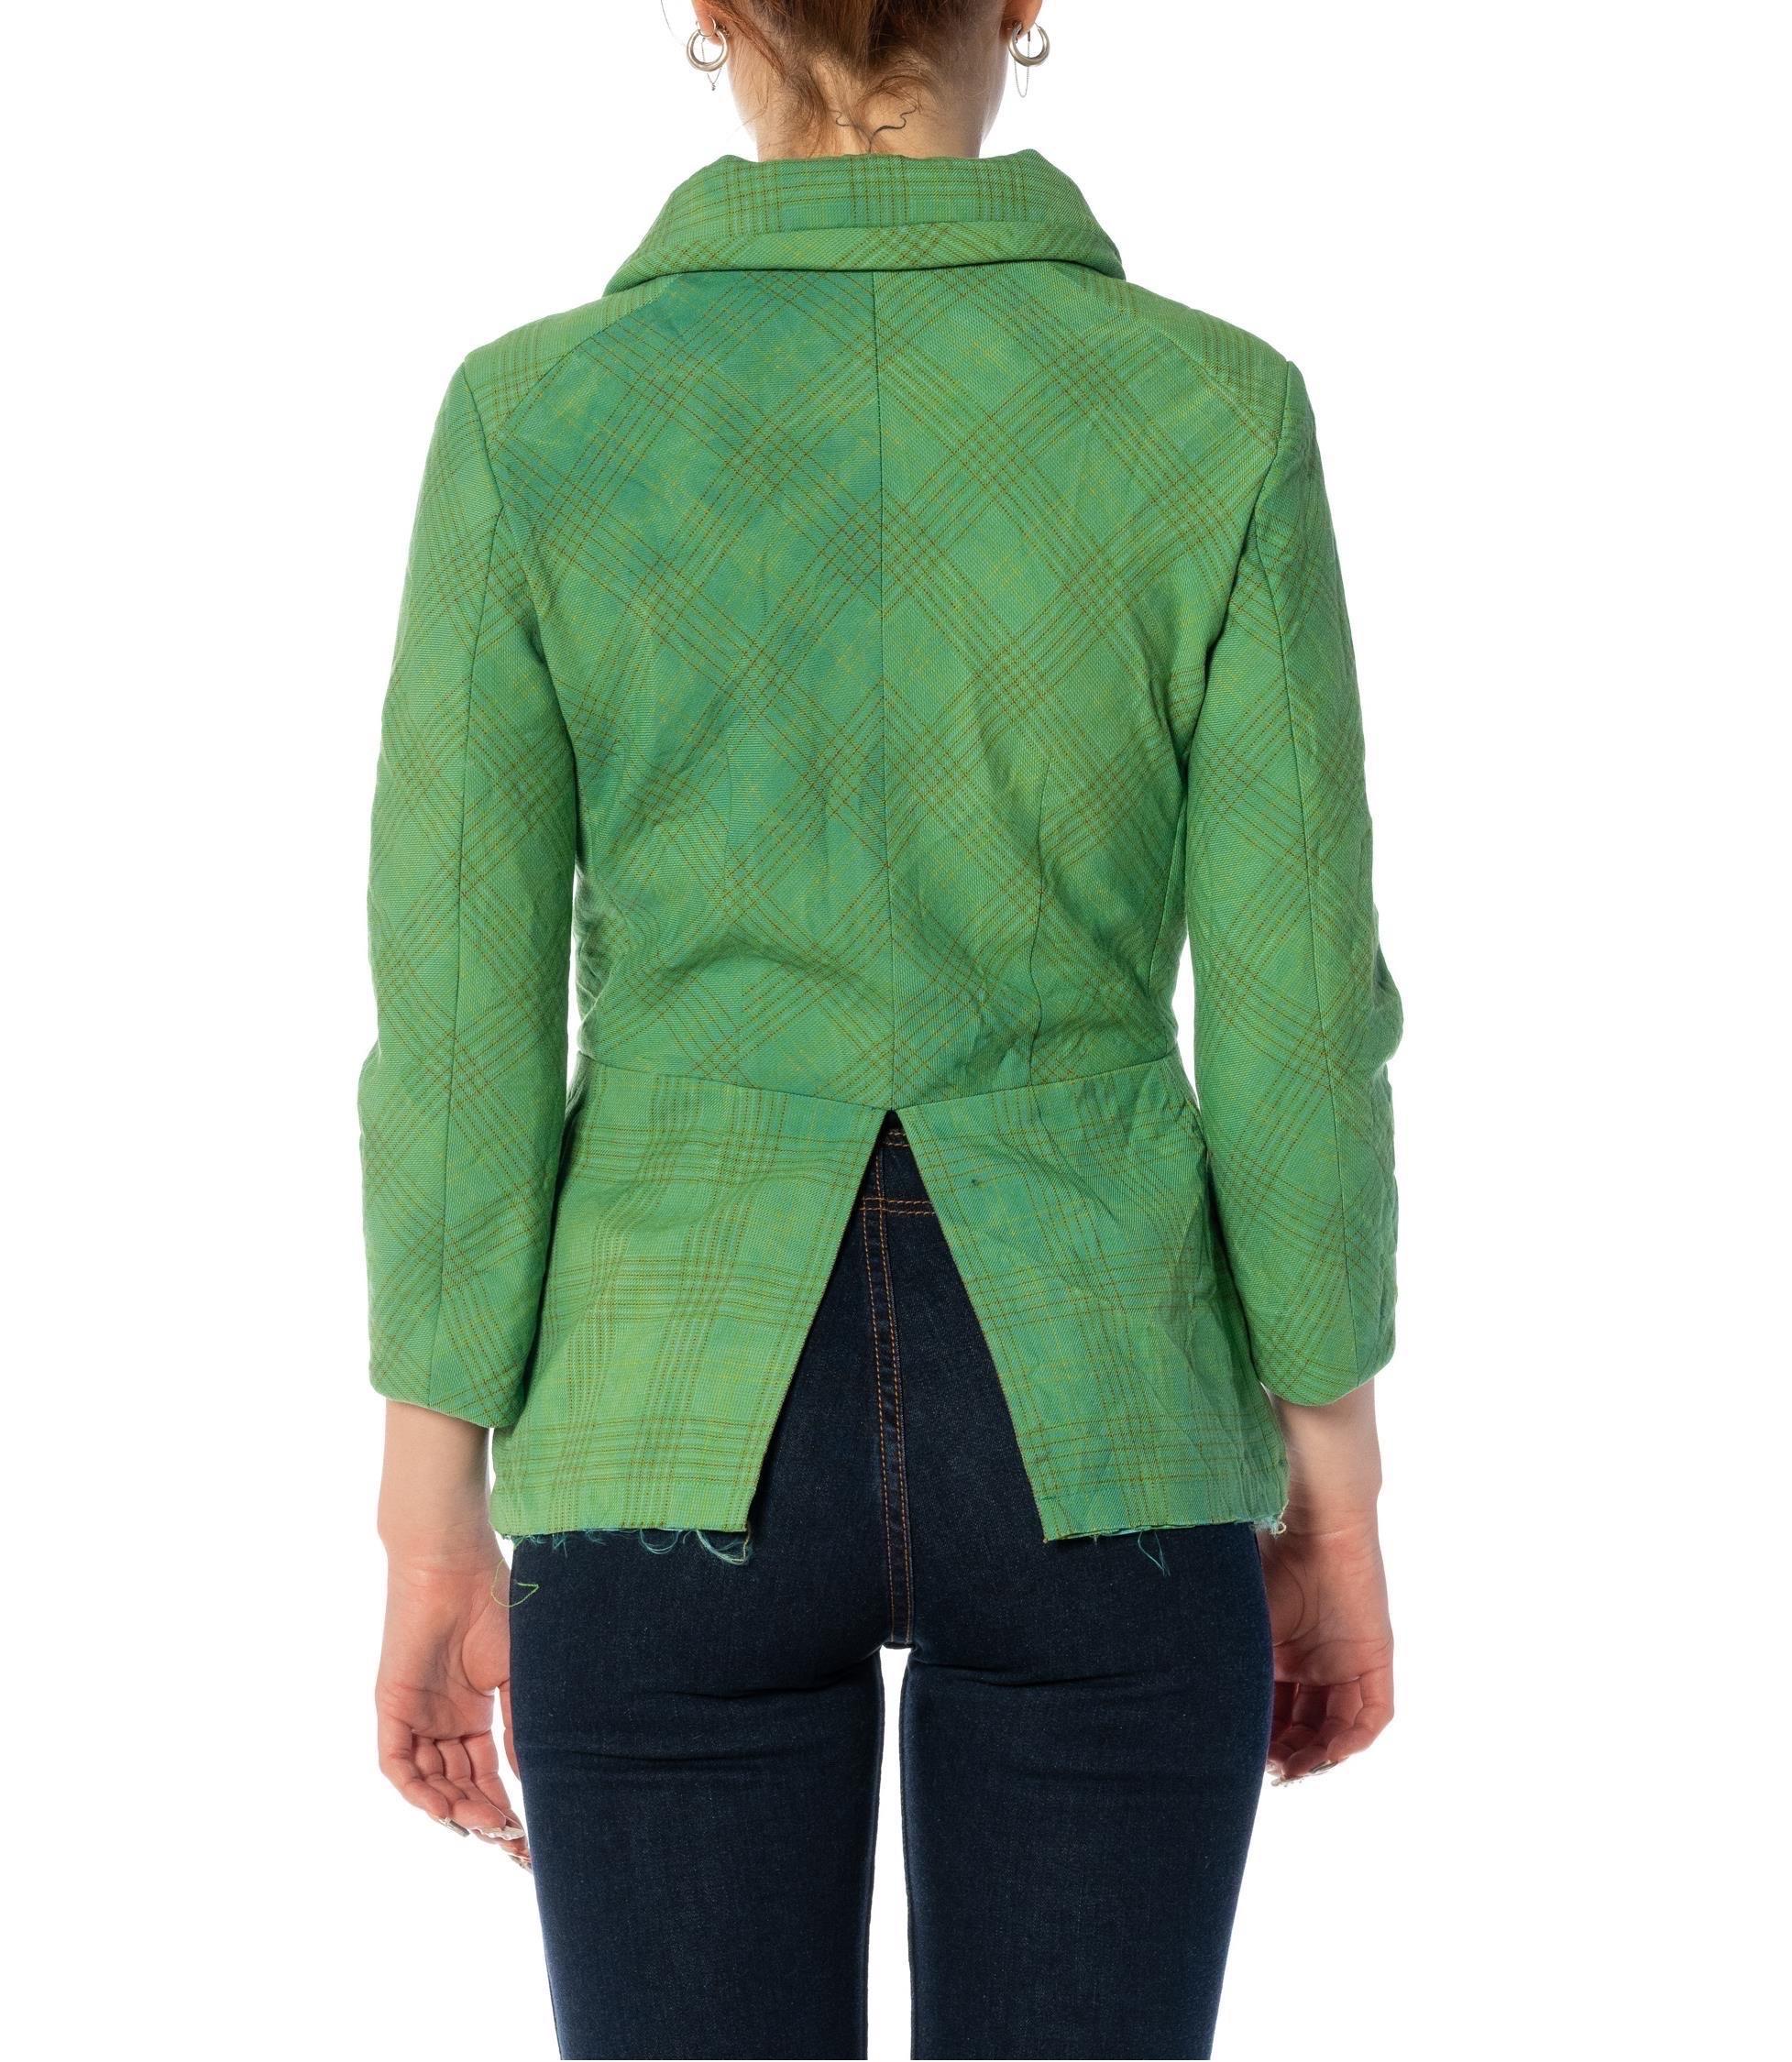 2000S JUNYA WATANABE COMME DES GARCONS Green Wrinkled Wool Jacket With Deconstr For Sale 6